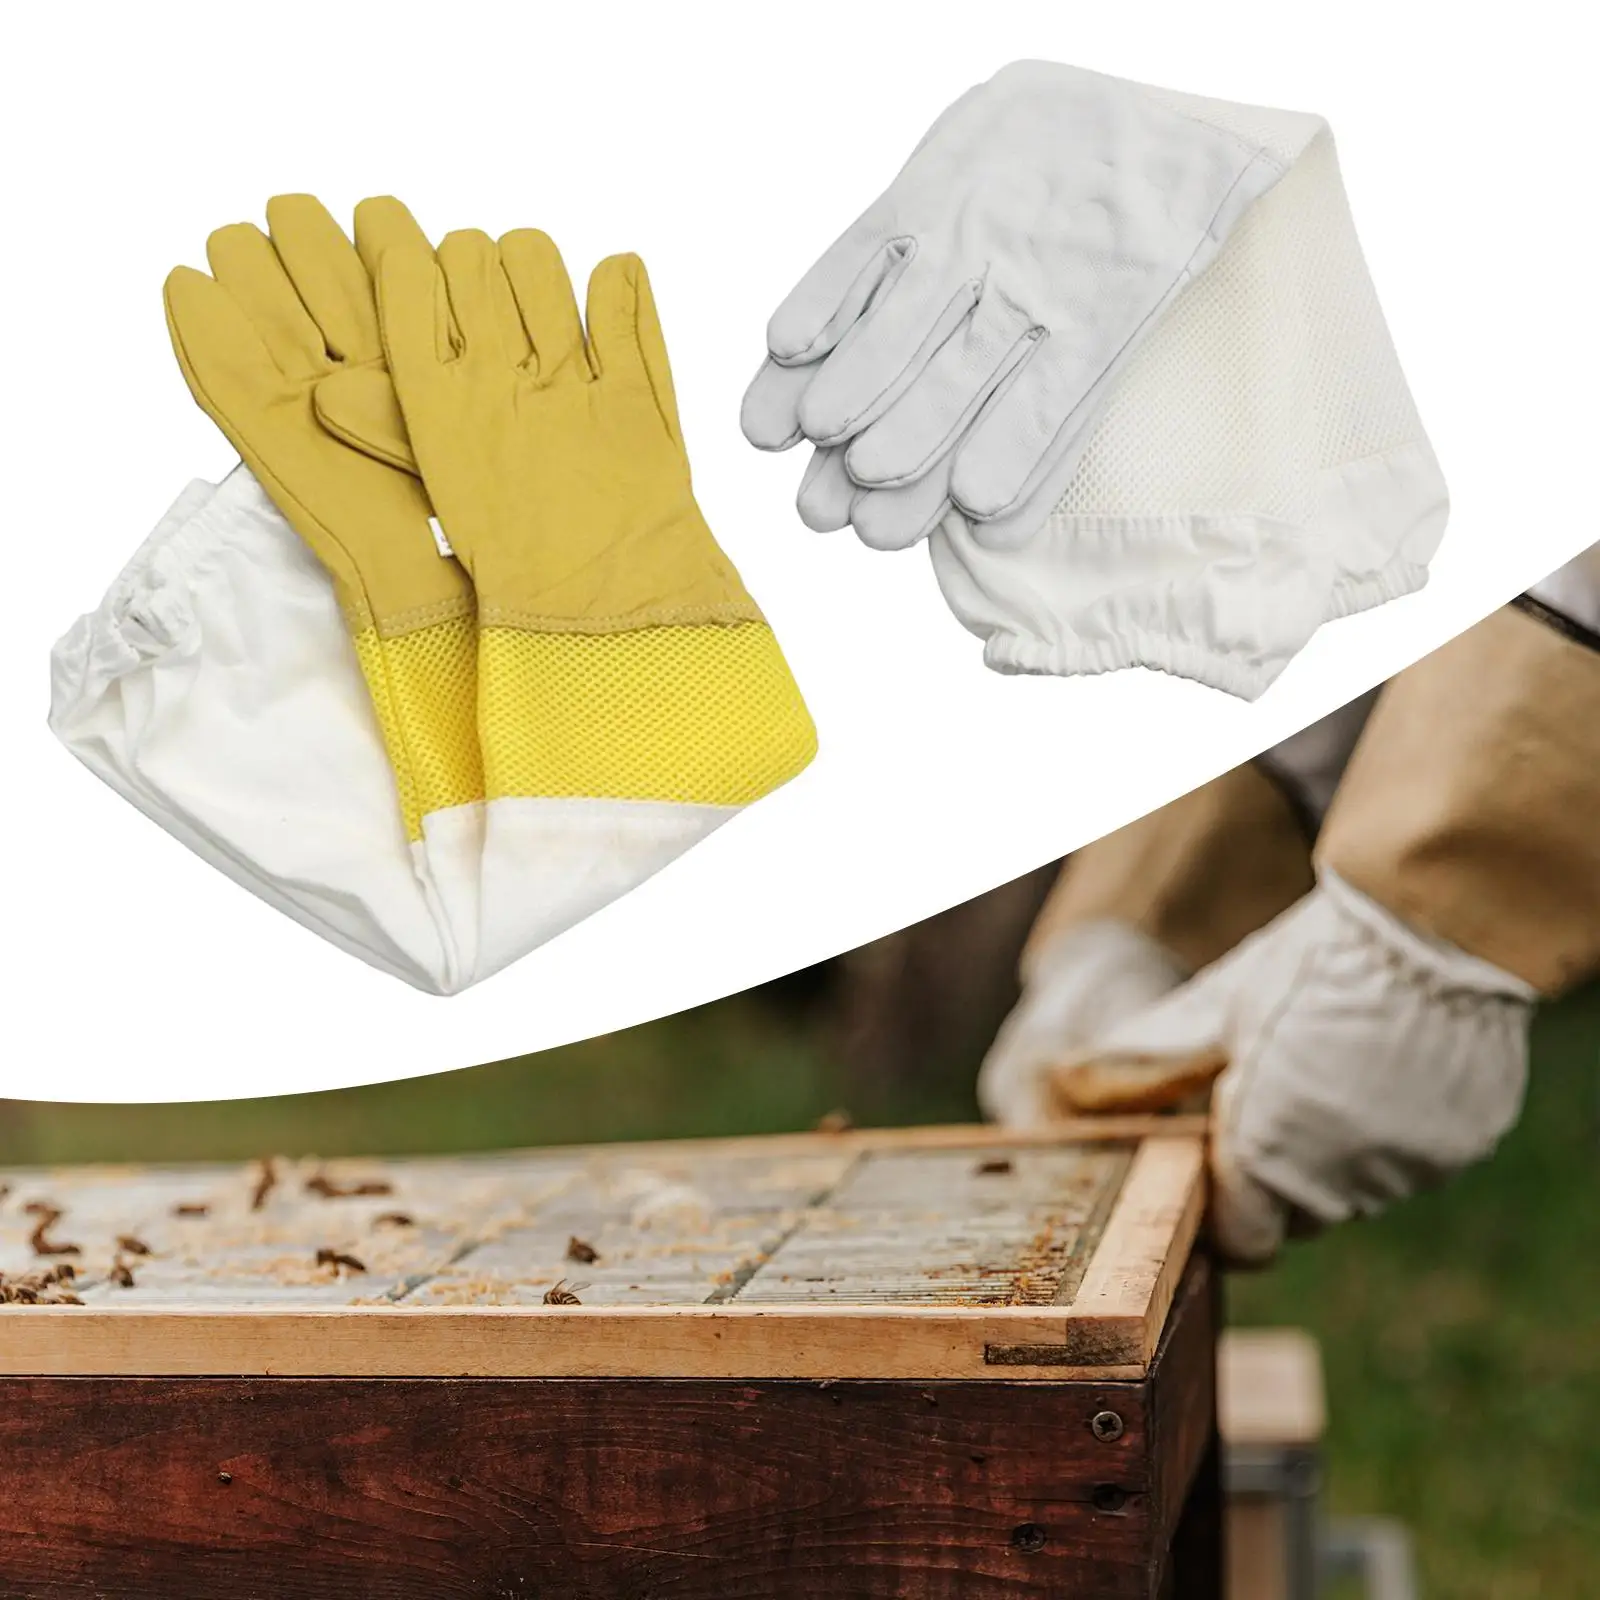 Beekeeping Gloves, Ventilated Professional Beekeeper Gloves for Pruning